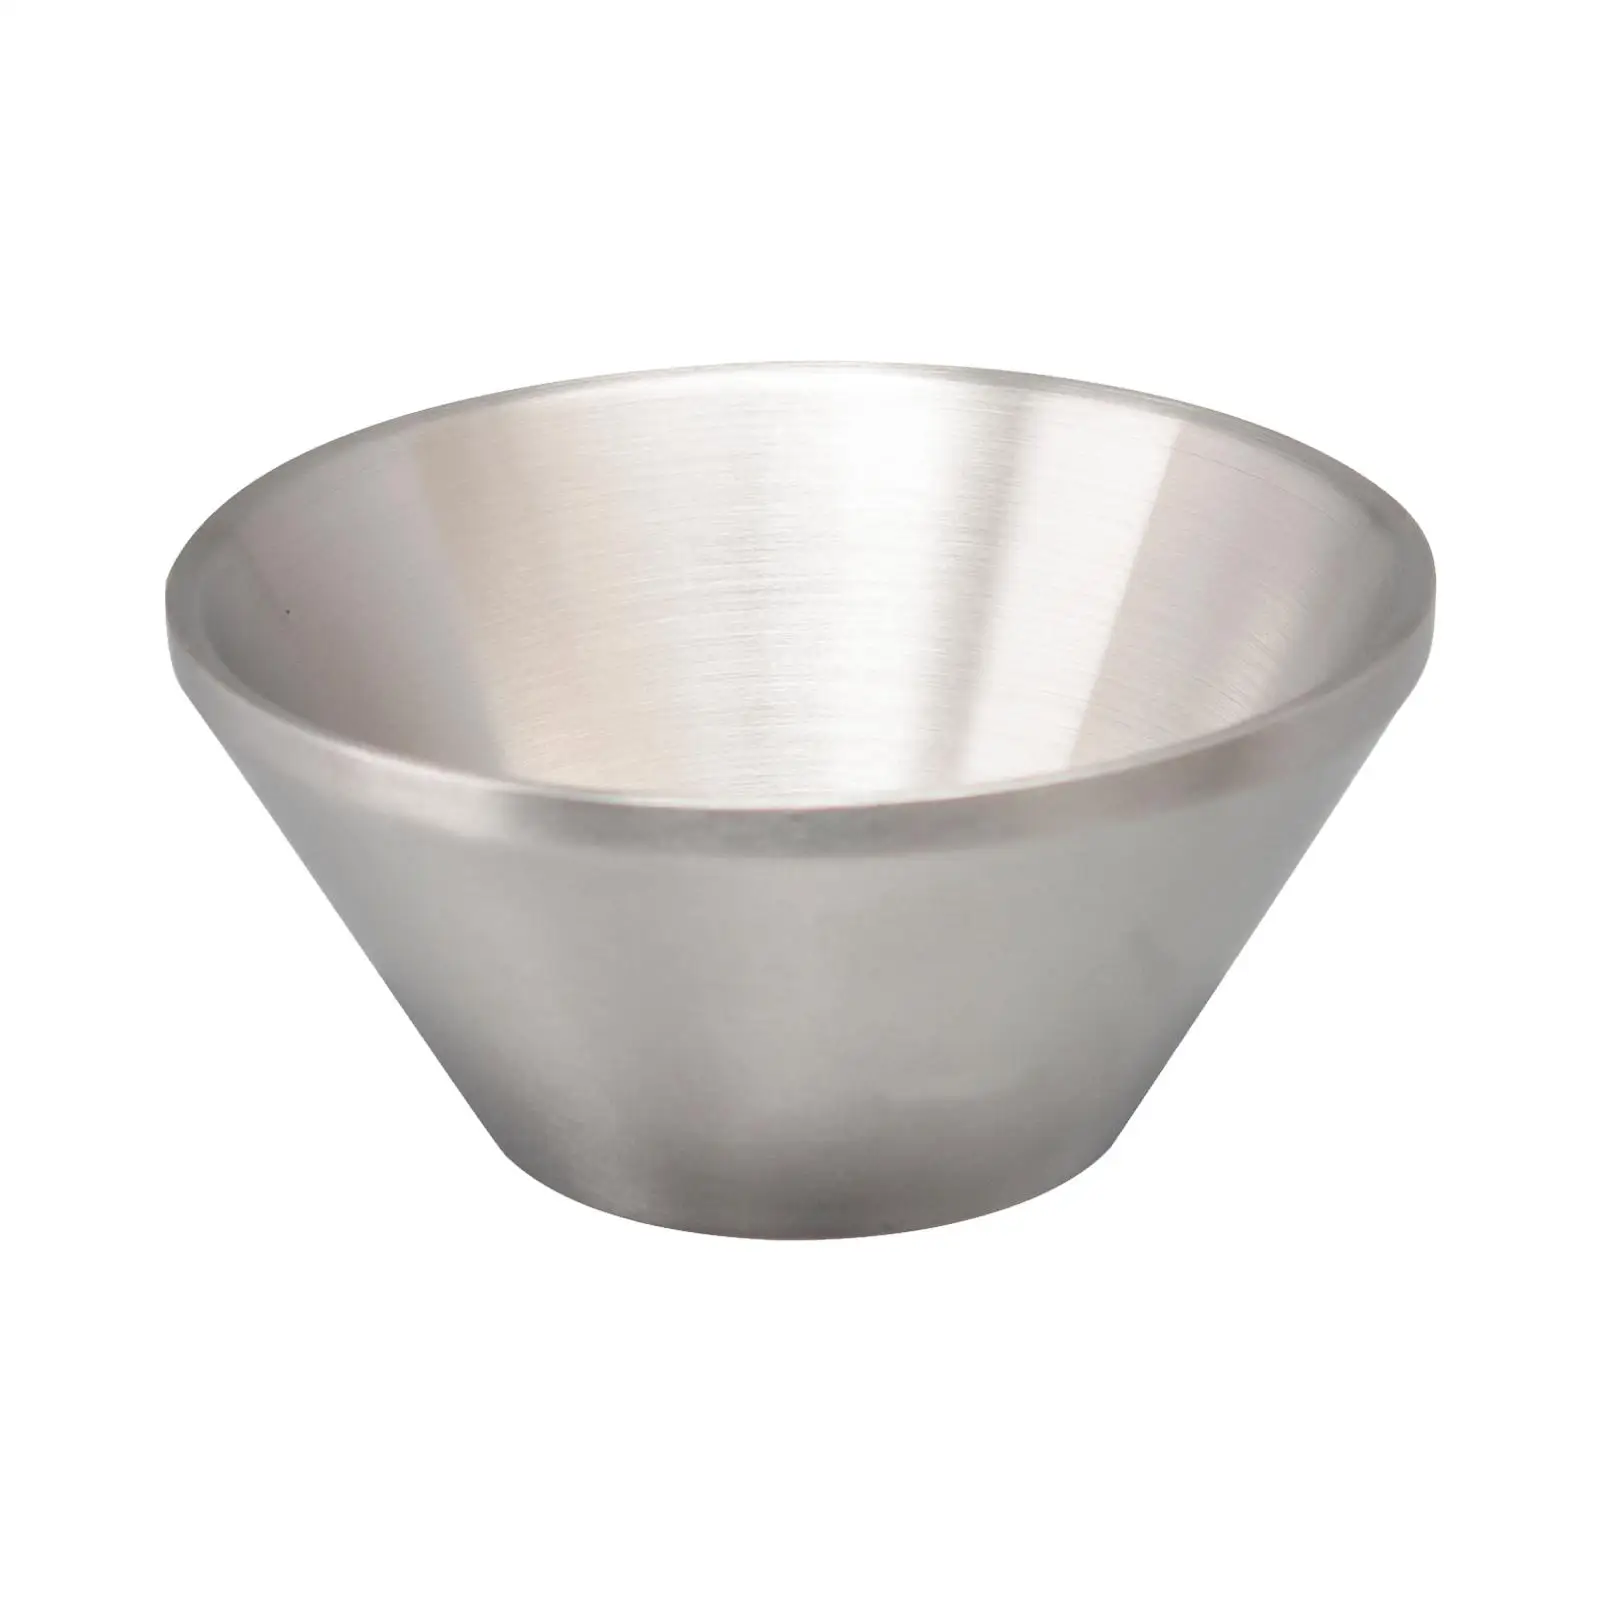 Stainless Steel Shaving Bowl Shave Soap Cup Heavy Duty Mixing Bowl Durable Shave Soap Bowl Provides A Luxurious Shave Experience